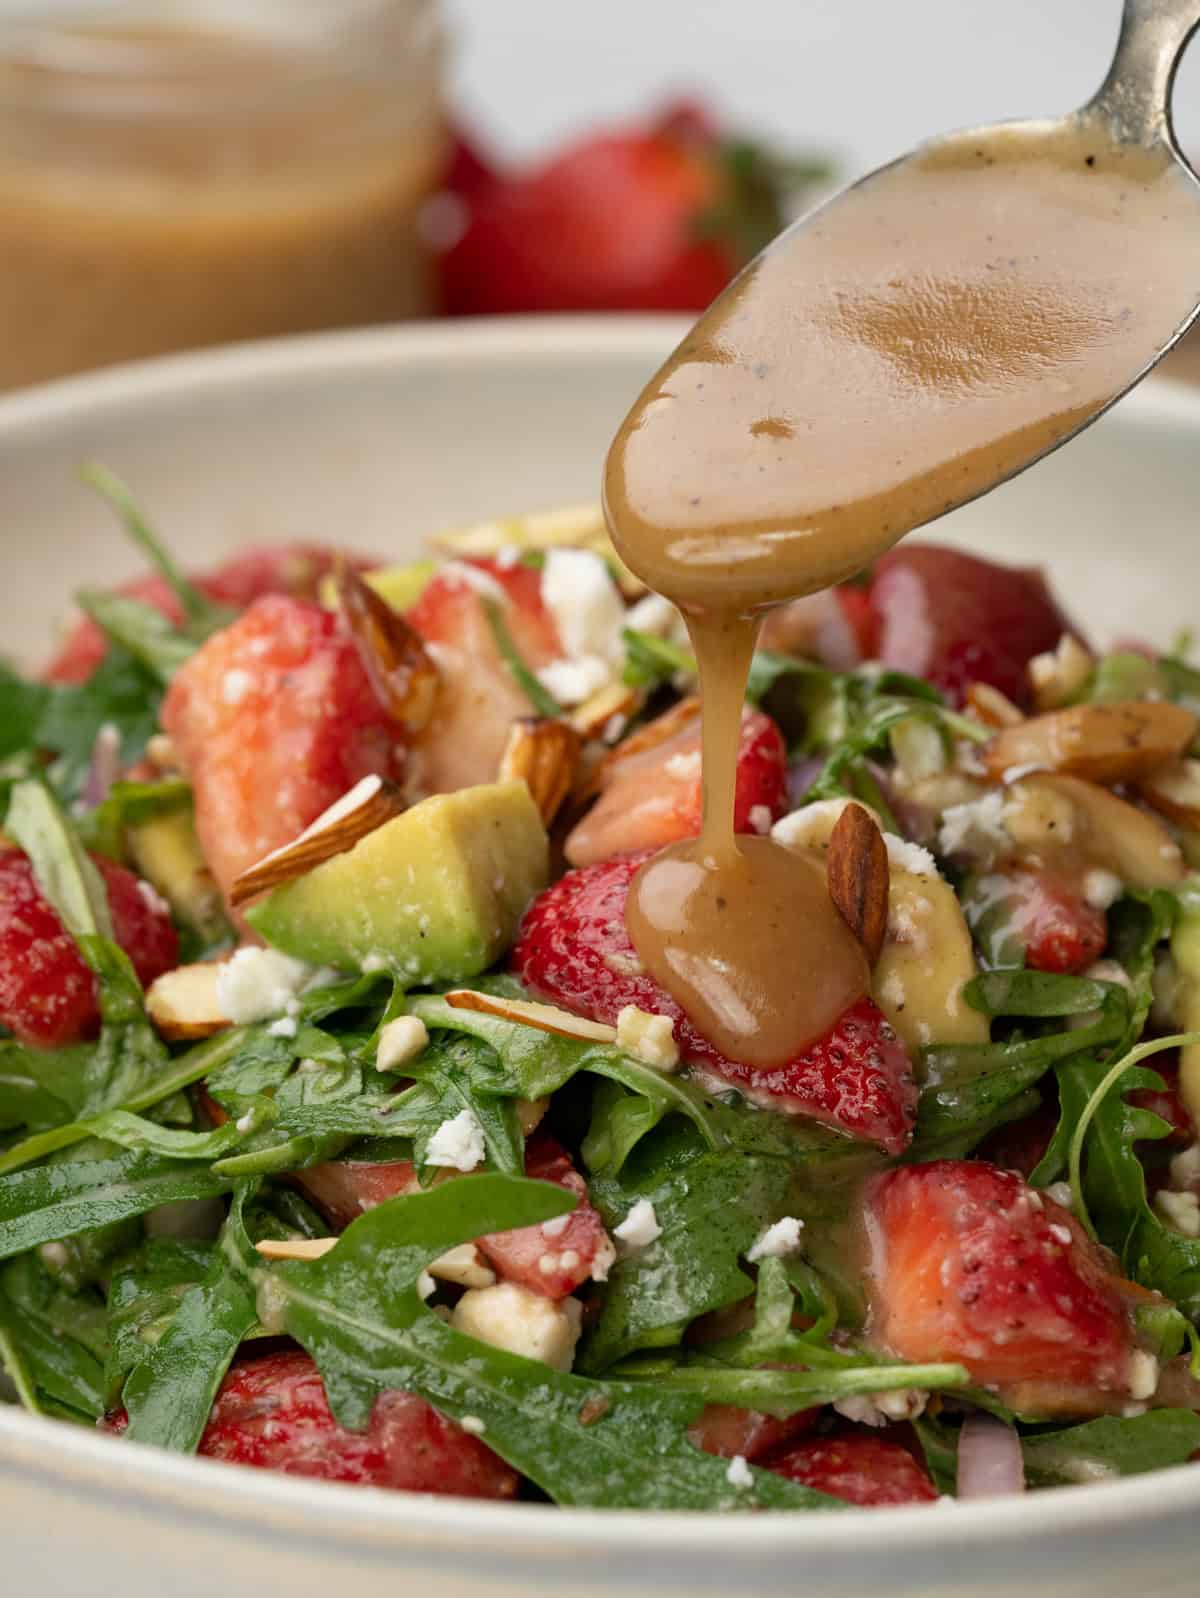 Creamy maple-Dijon dressing being poured over Strawberry Salad.